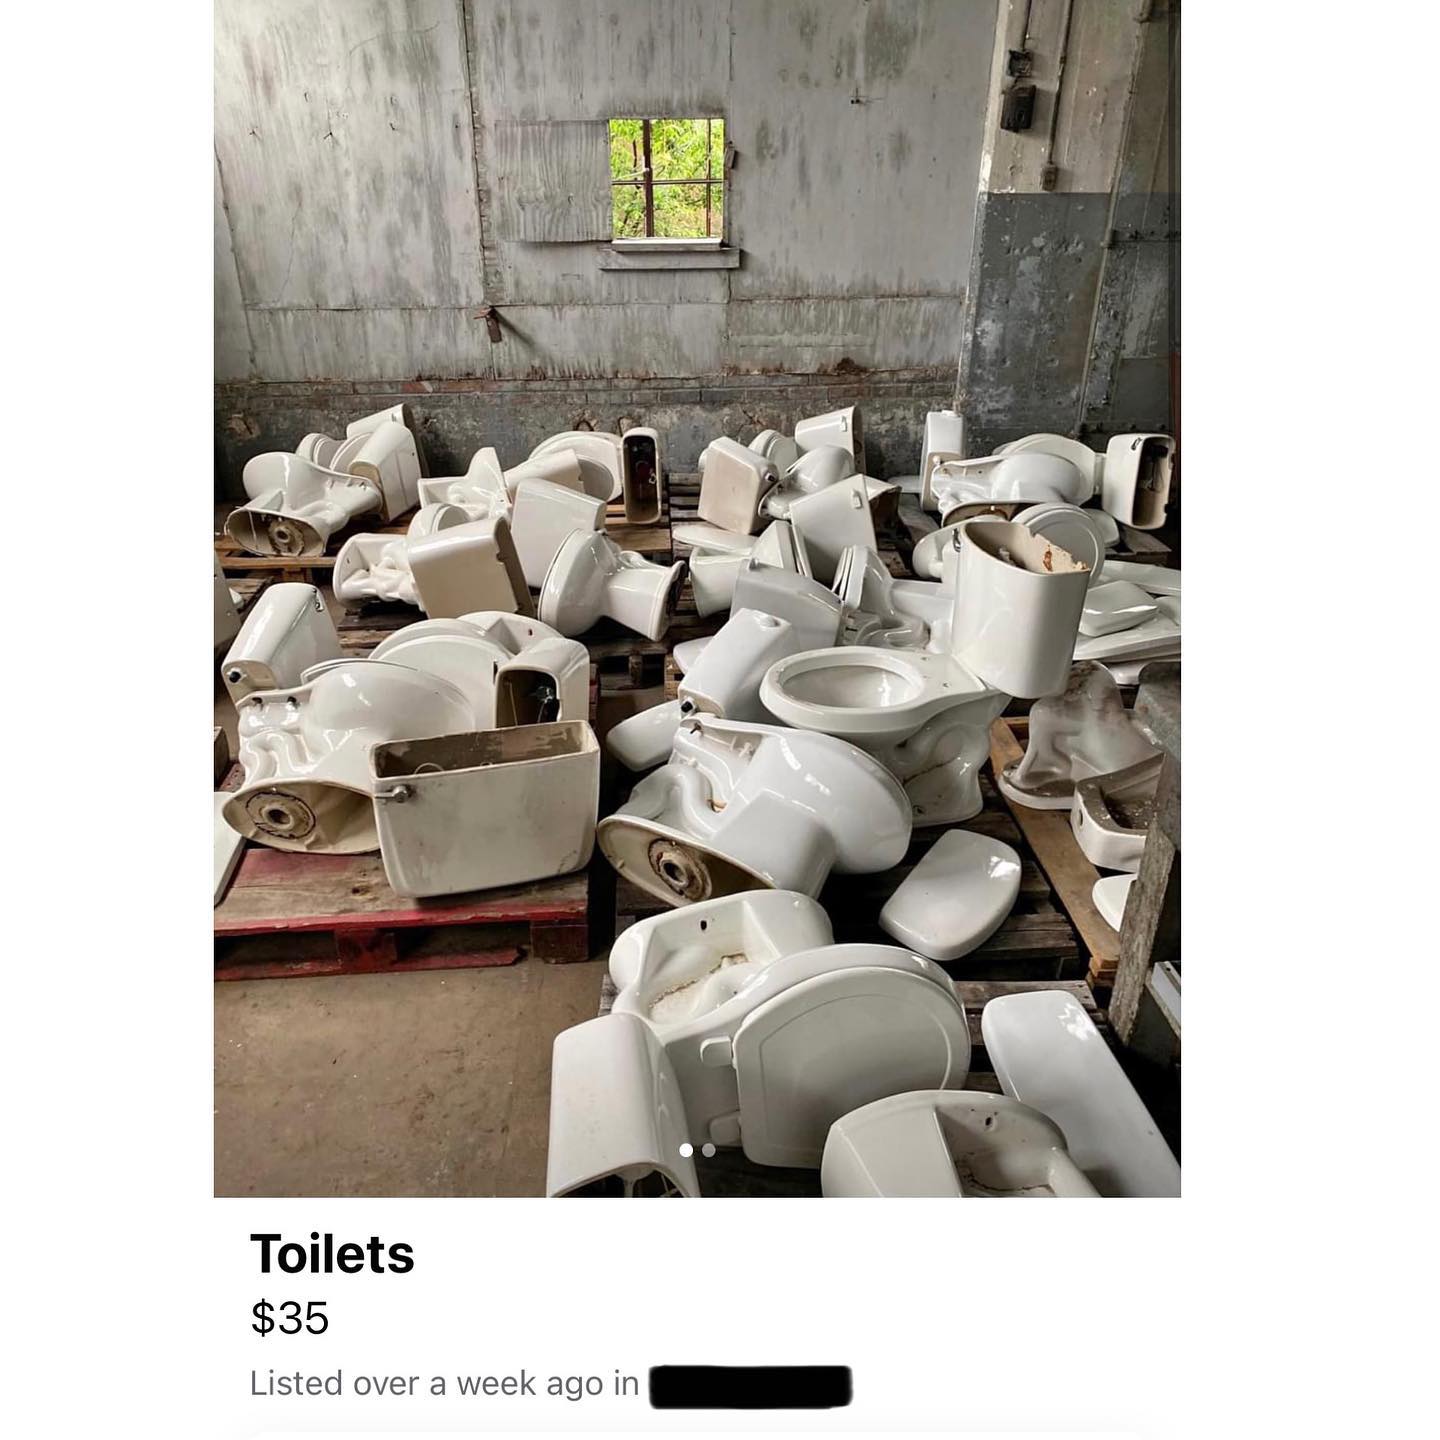 room full of used toilets being sold on Facebook